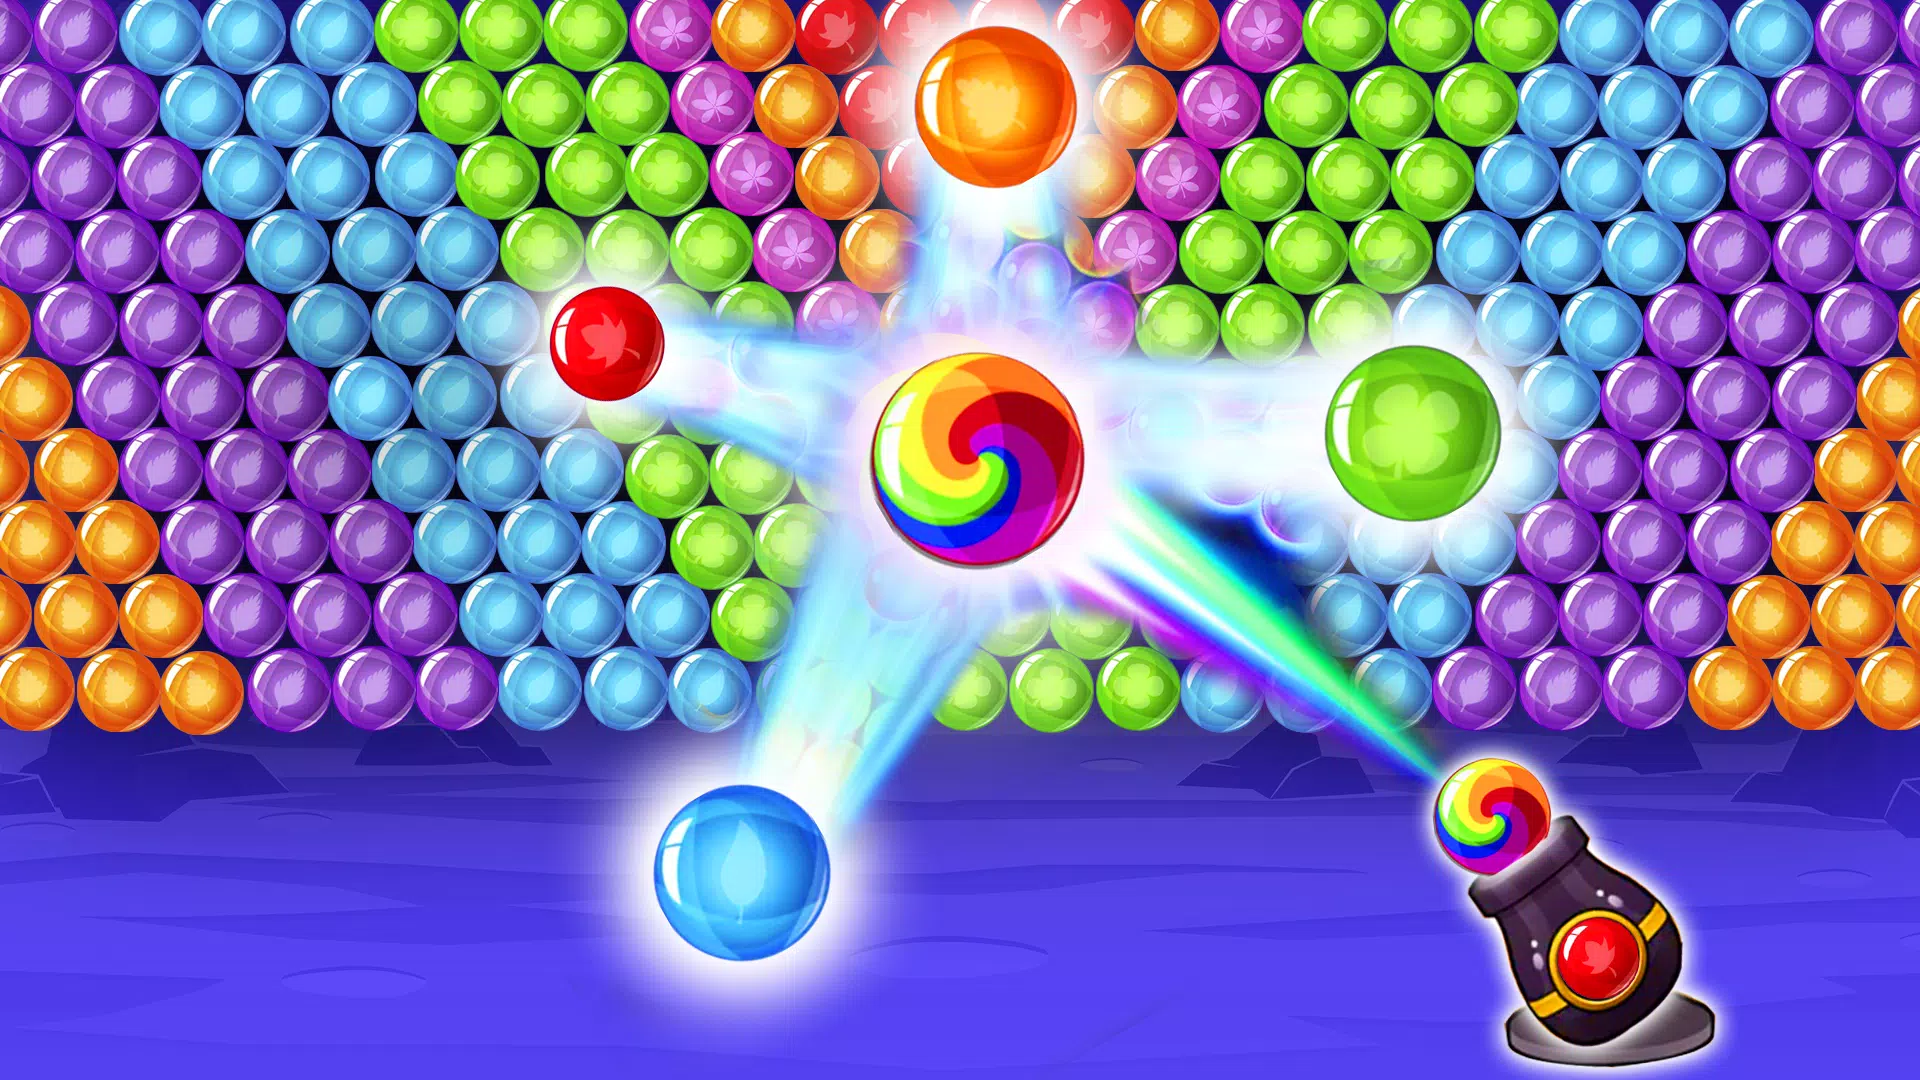 Bubble Shooter in 2023  Bubble shooter, Bubble shooter games